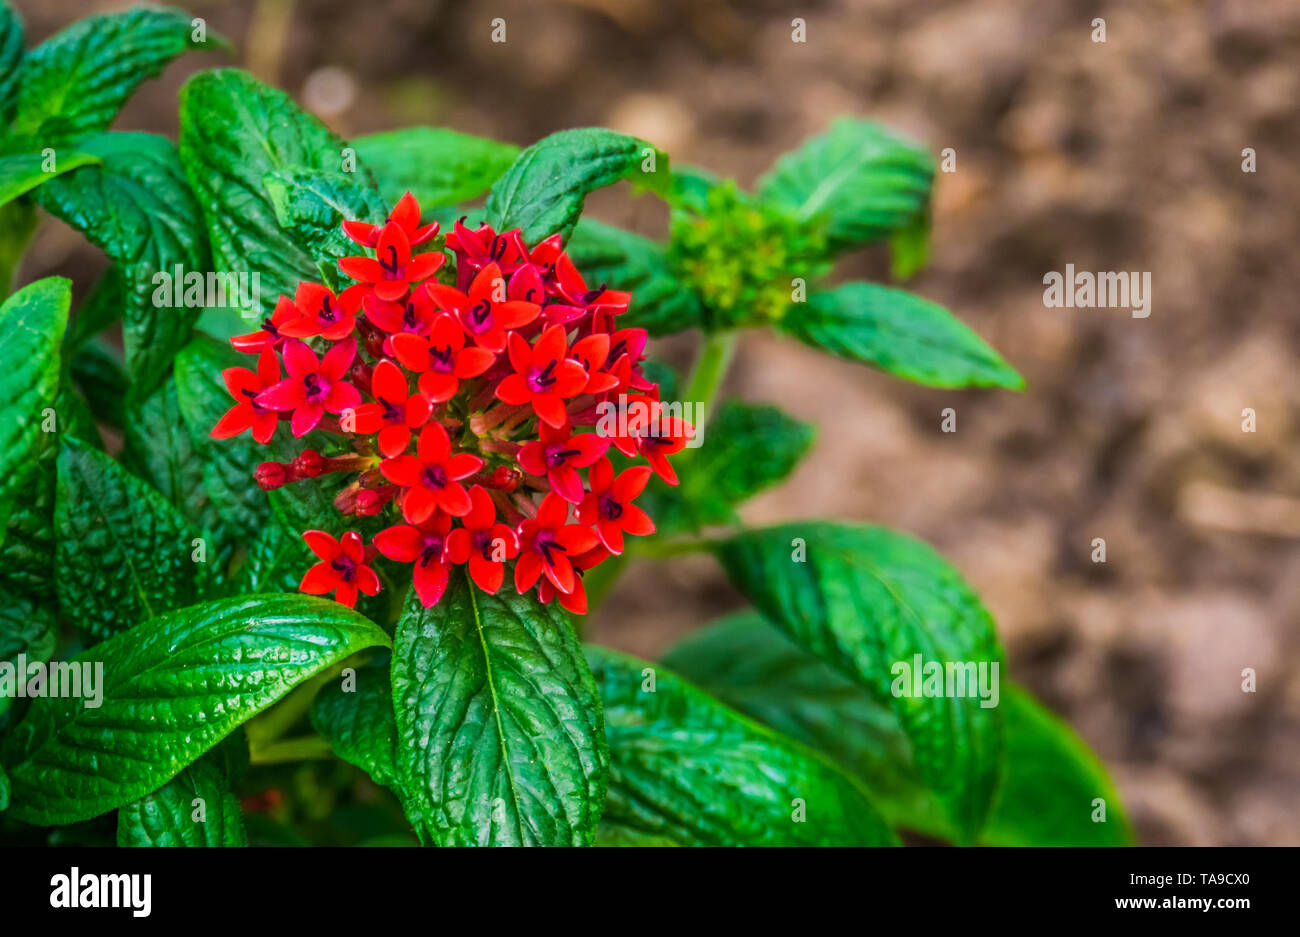 macro closeup of red clustered flowers on a pentas plant, popular tropical plant from Africa, ornamental flowering garden plants, nature background Stock Photo